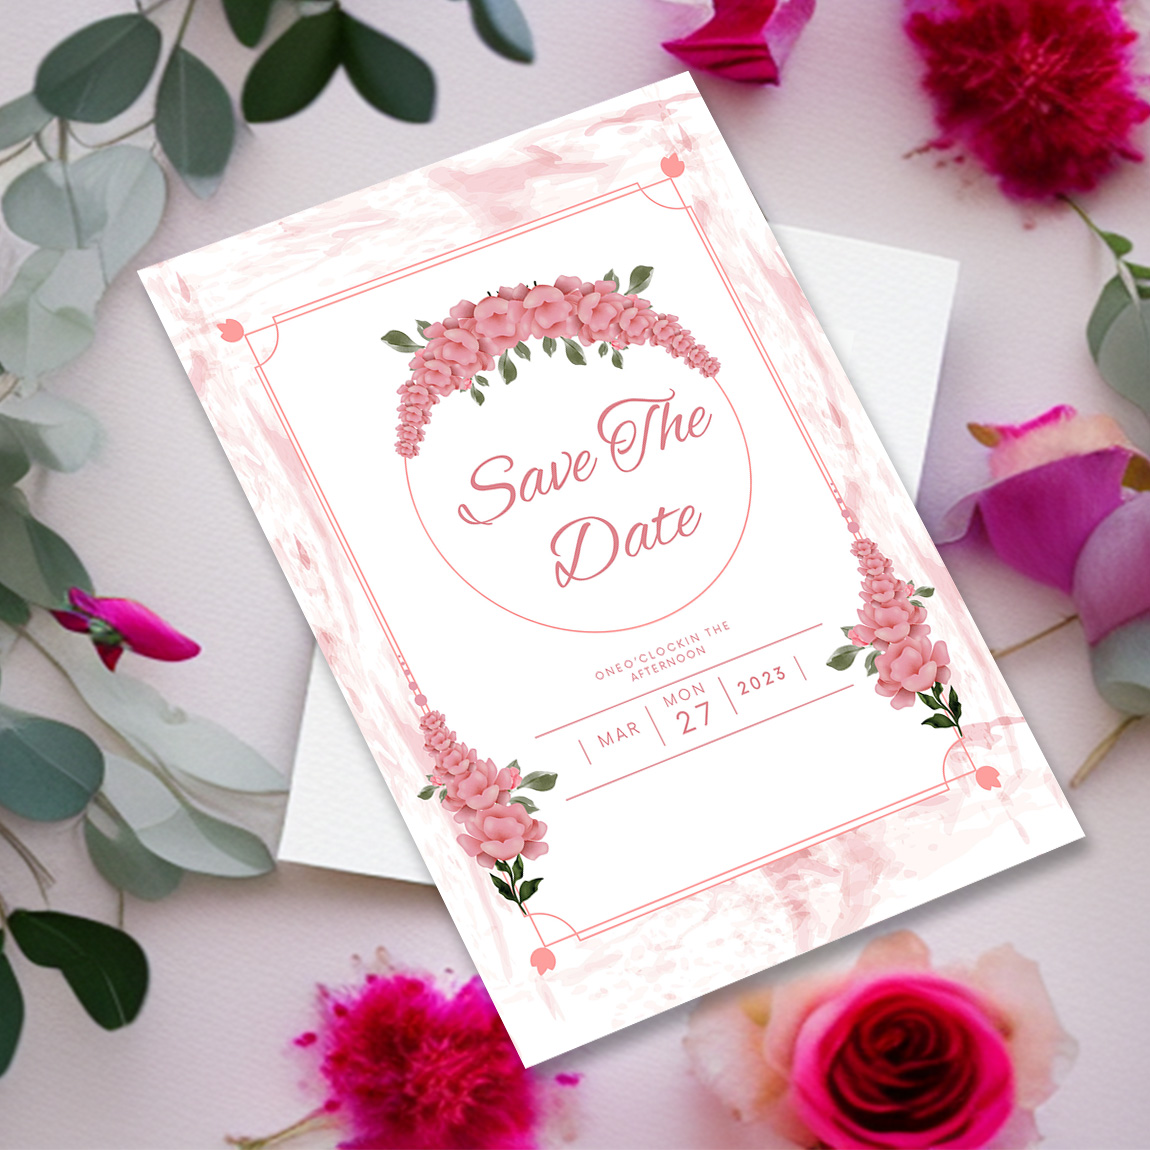 Image with irresistible wedding invitation card in pink tones and flowers.